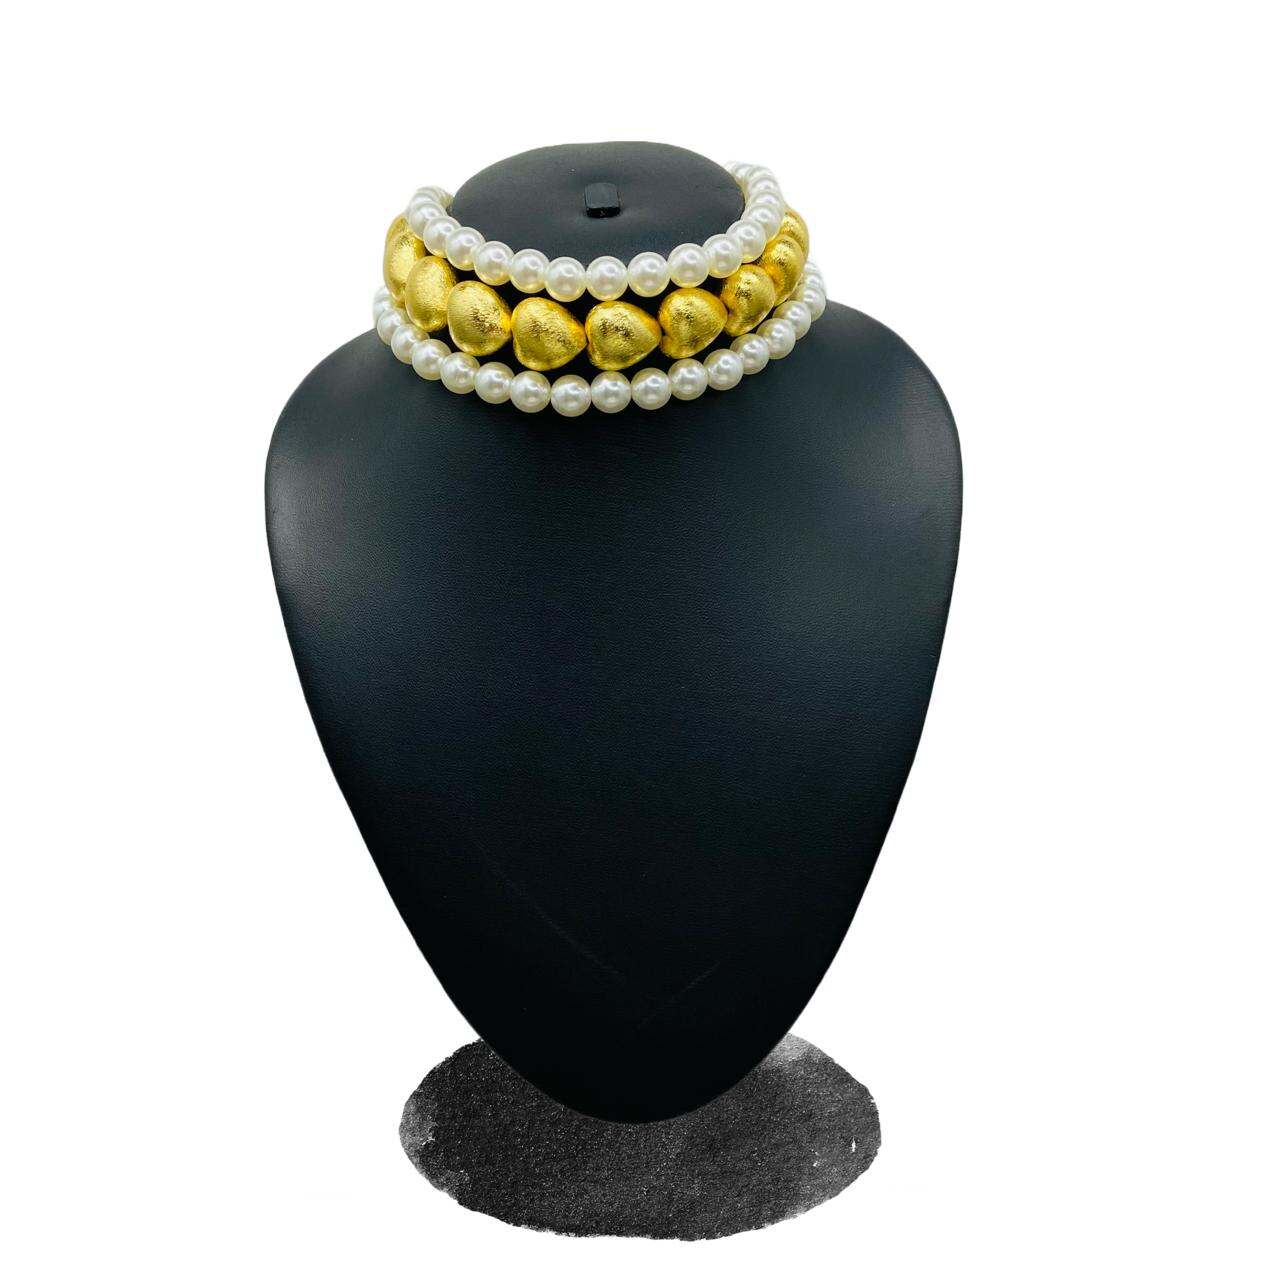 Gold And Pearl Necklace